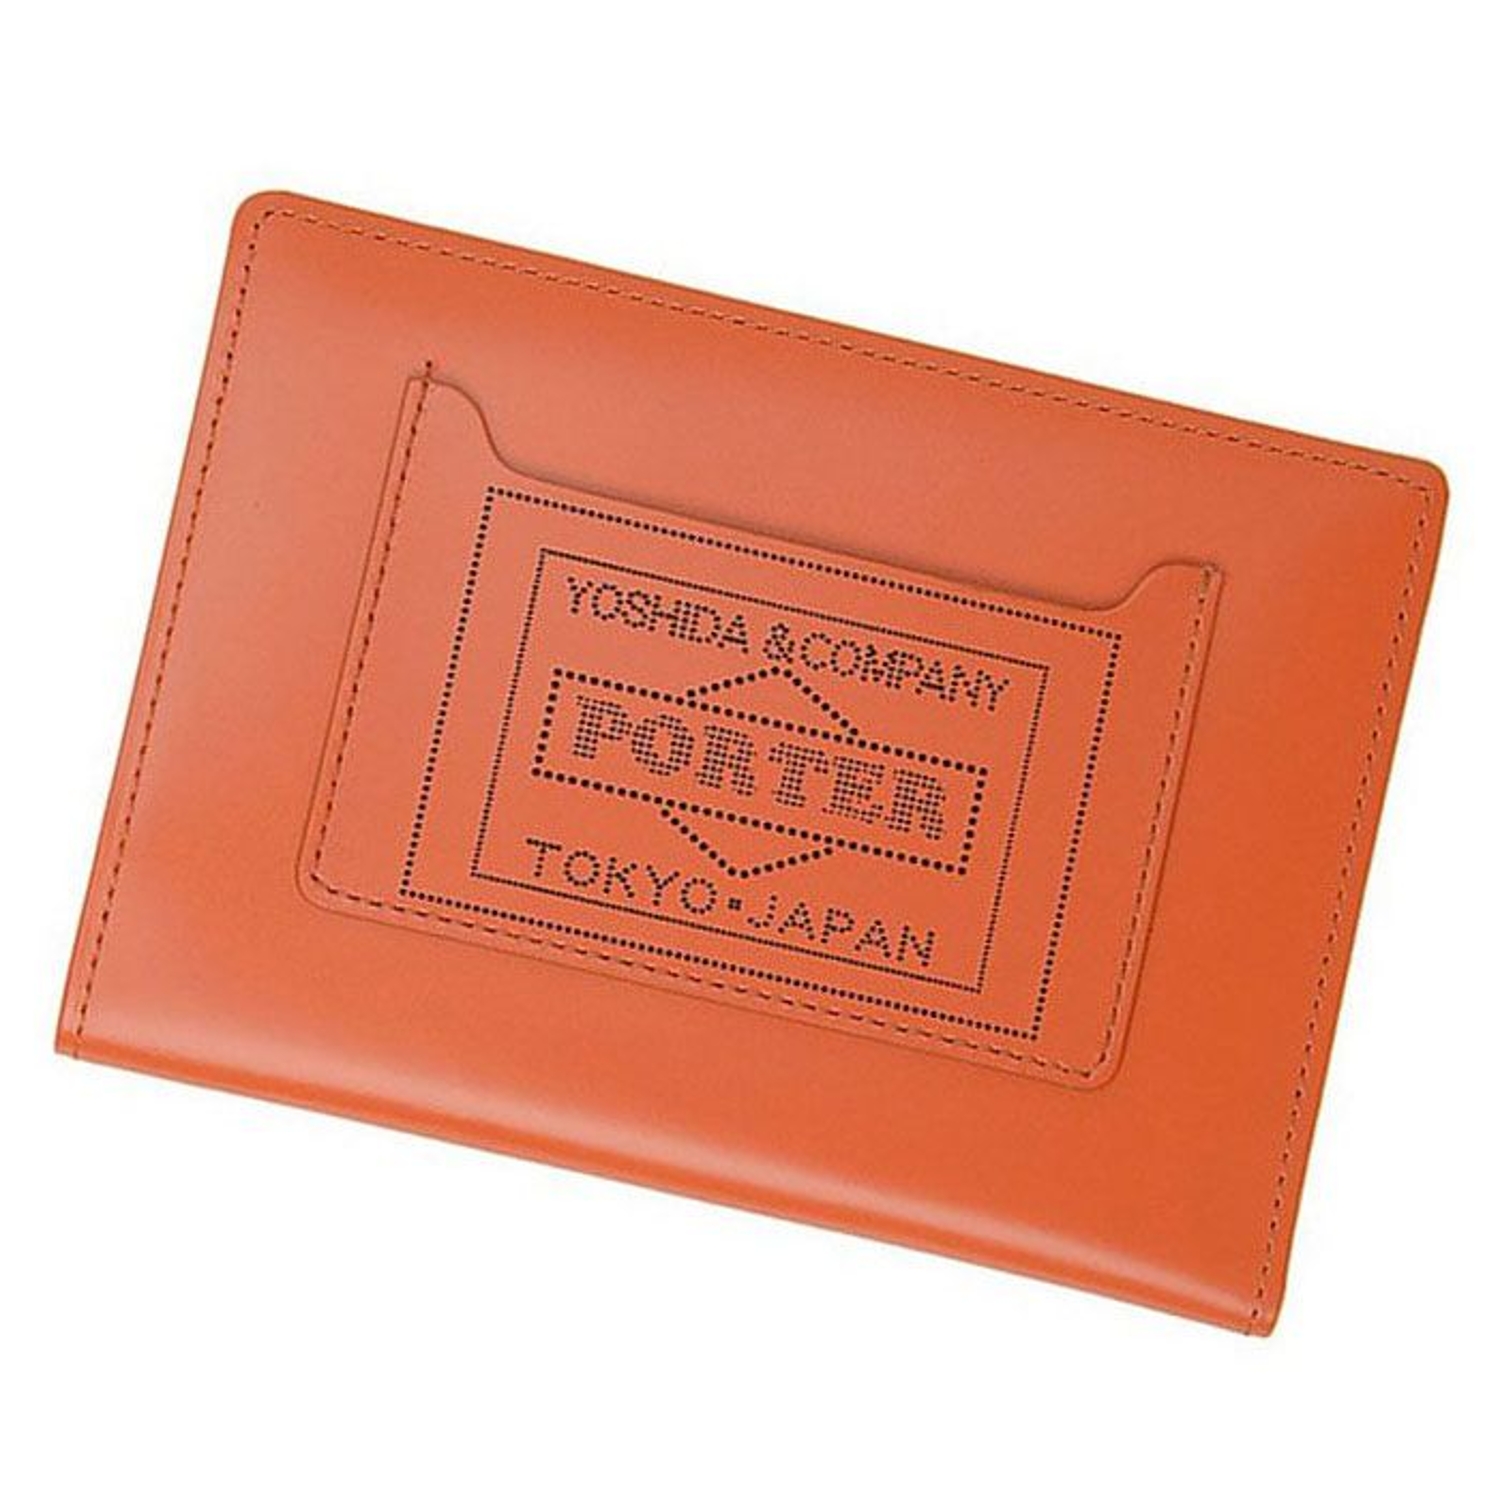 PORTER / PS LEATHER WALLET GLASS LEATHER Ver. / PASSPORT CASE (103734)